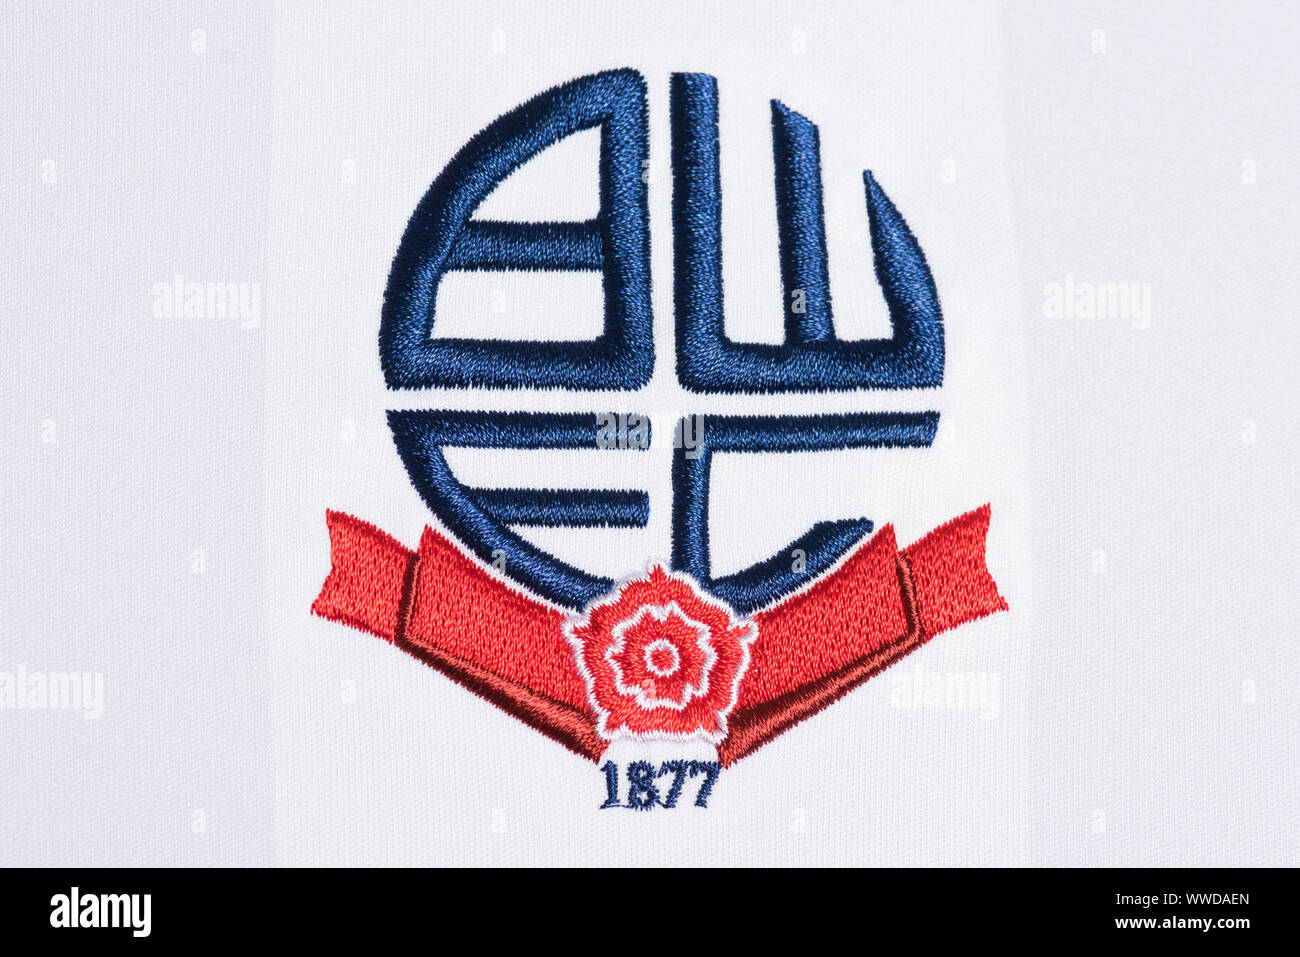 Close up of Bolton Wanderers FC badge Stock Photo